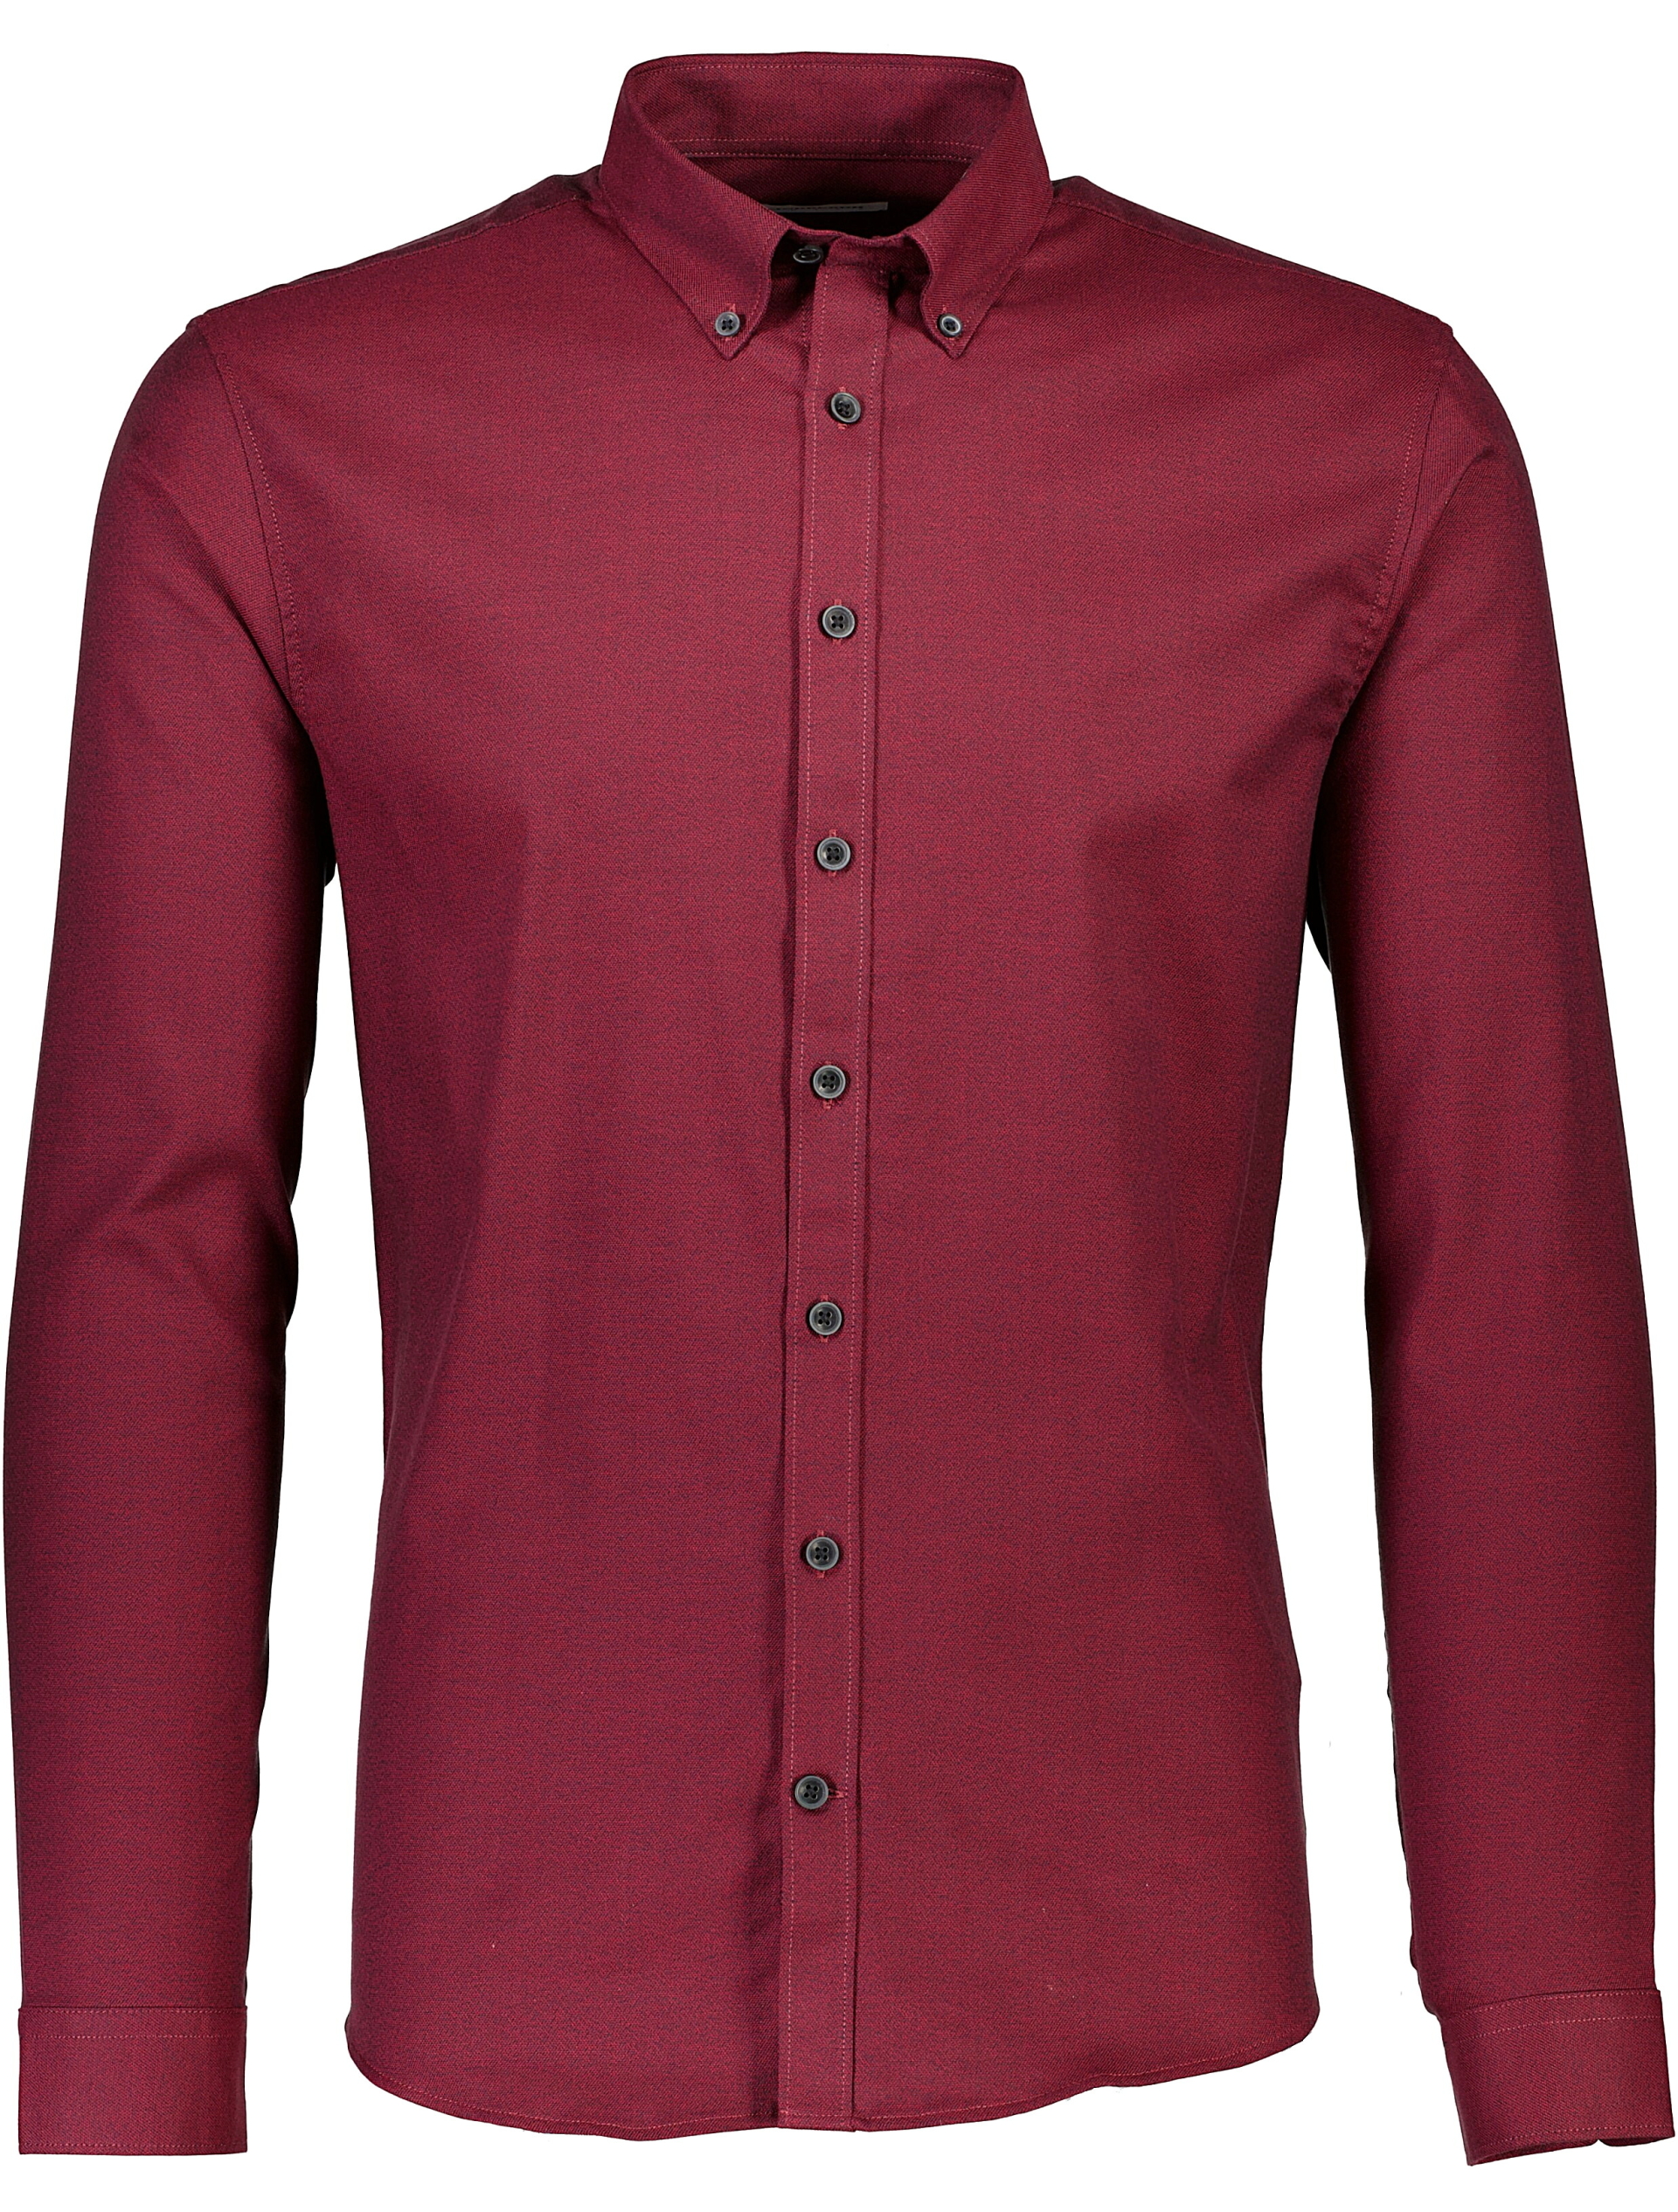 Lindbergh Business casual shirt red / bordeaux